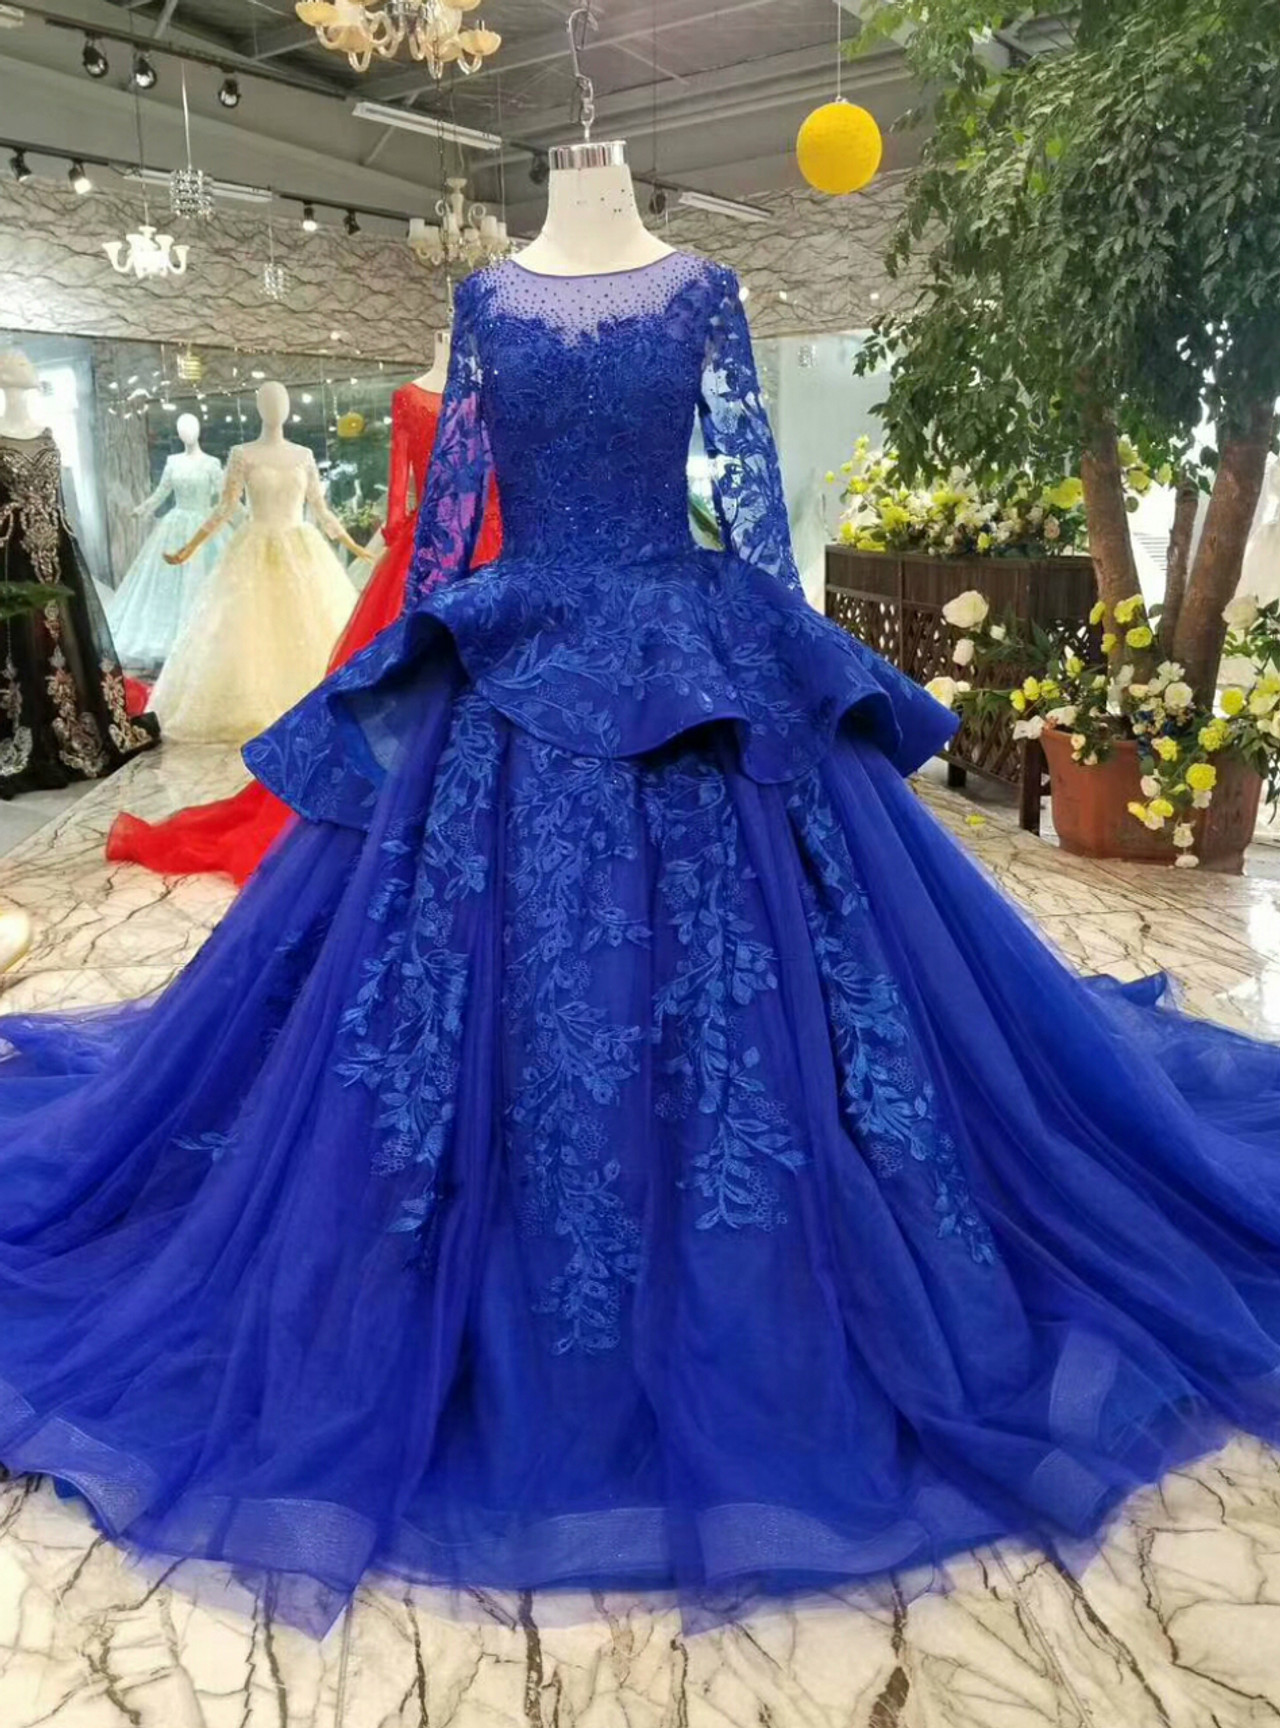 Blue Ball Gown Tulle Long Sleeve Appliques Flower Wedding Dress